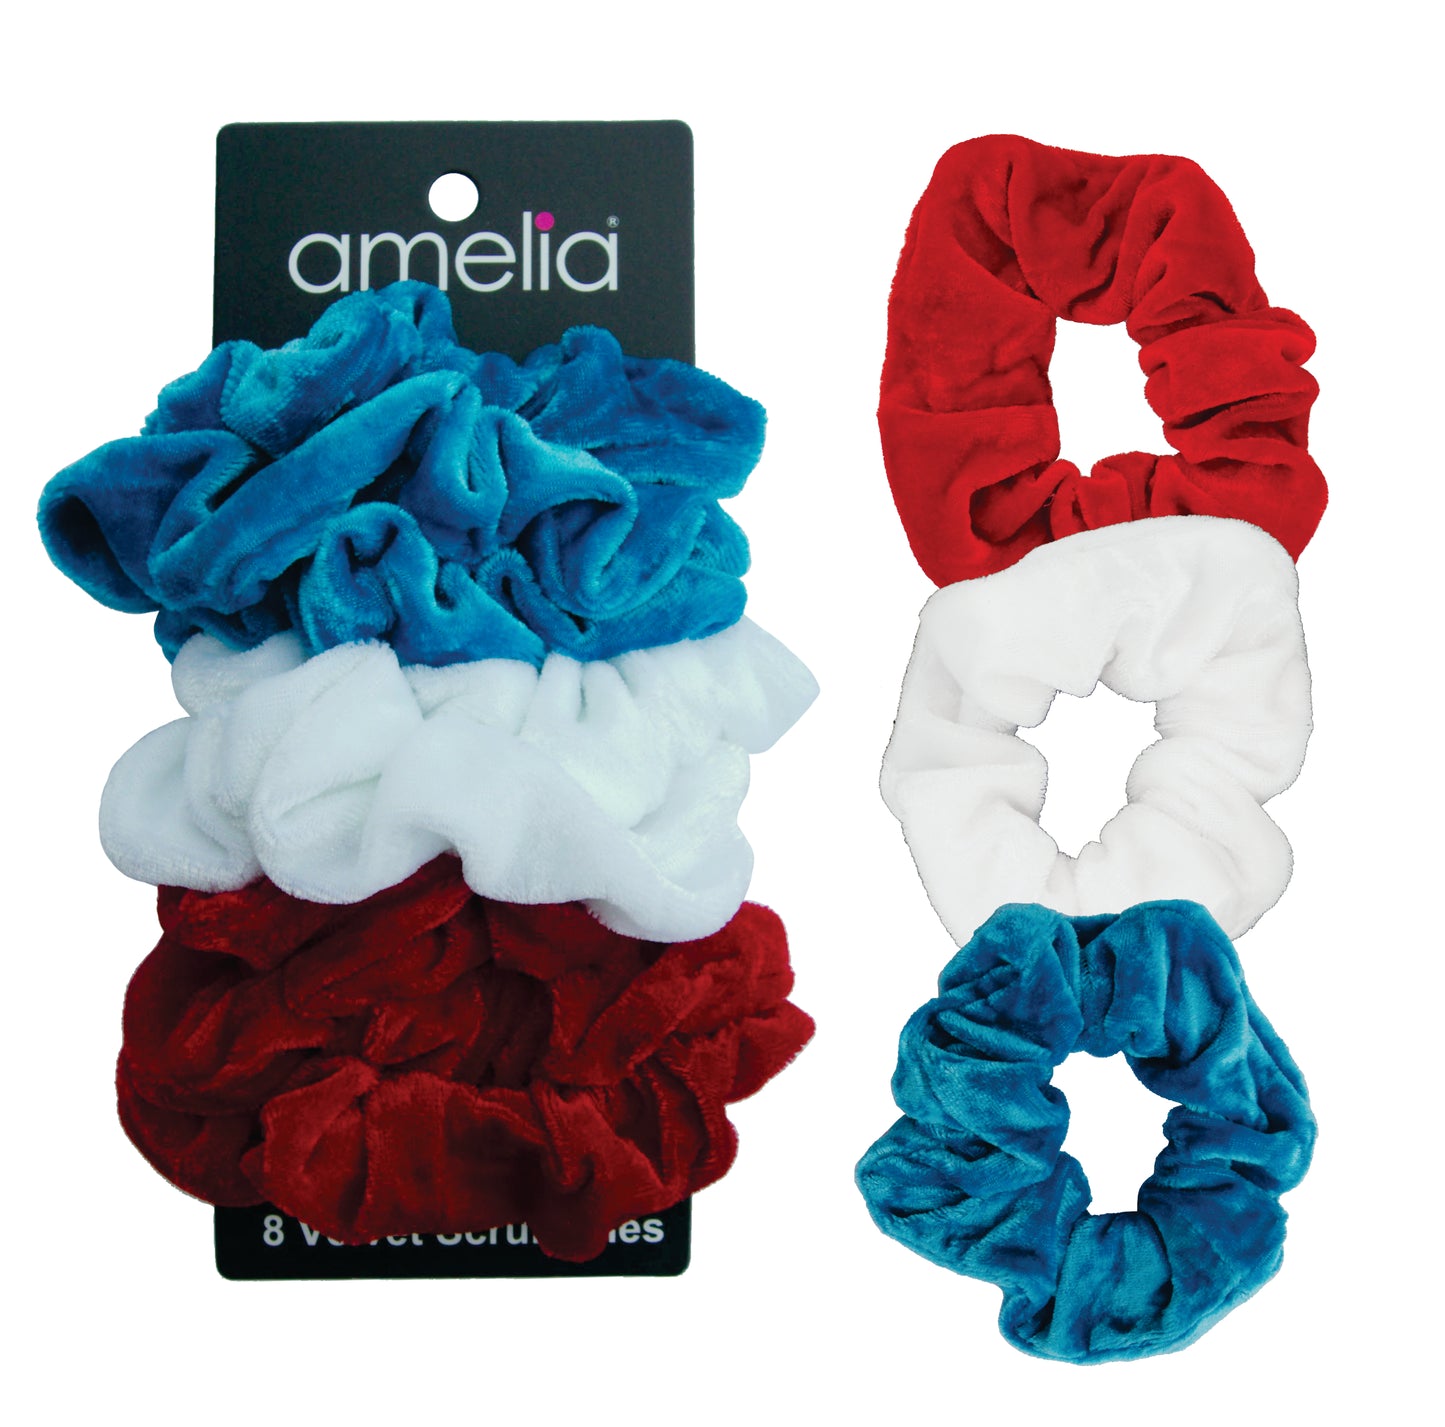 Amelia Beauty, Red, White and Blue Velvet Scrunchies, 3.5in Diameter, Gentle on Hair, Strong Hold, No Snag, No Dents or Creases. 8 Pack